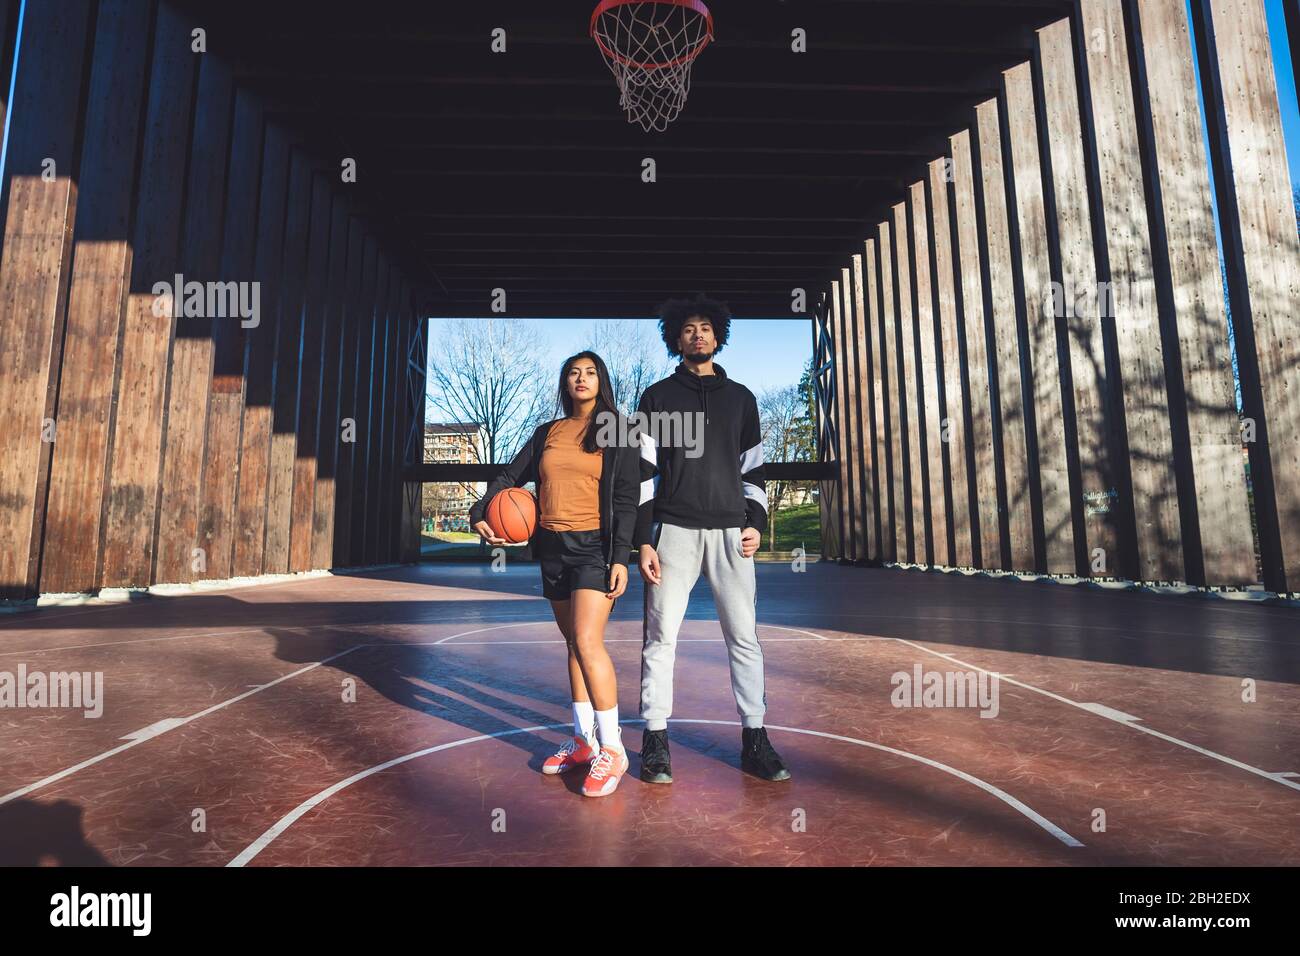 Portrait of young man and woman standing on basketball court Stock Photo